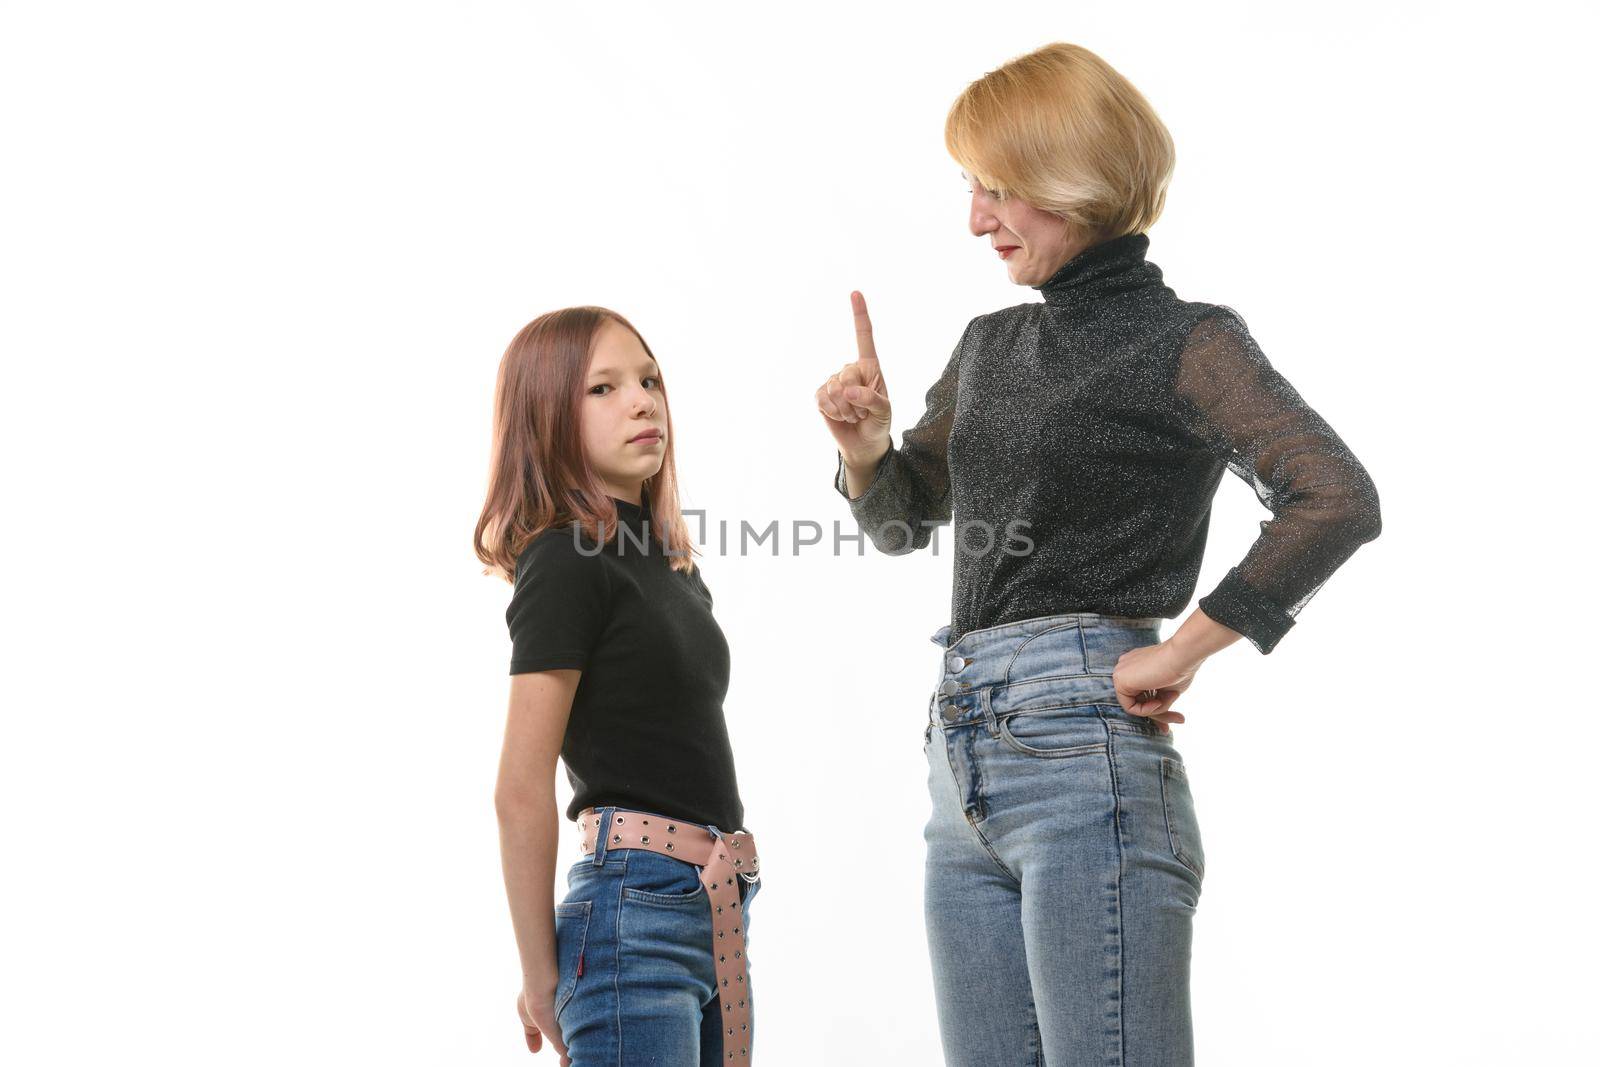 Woman punishing daughter for wrongdoing, isolated on white background a